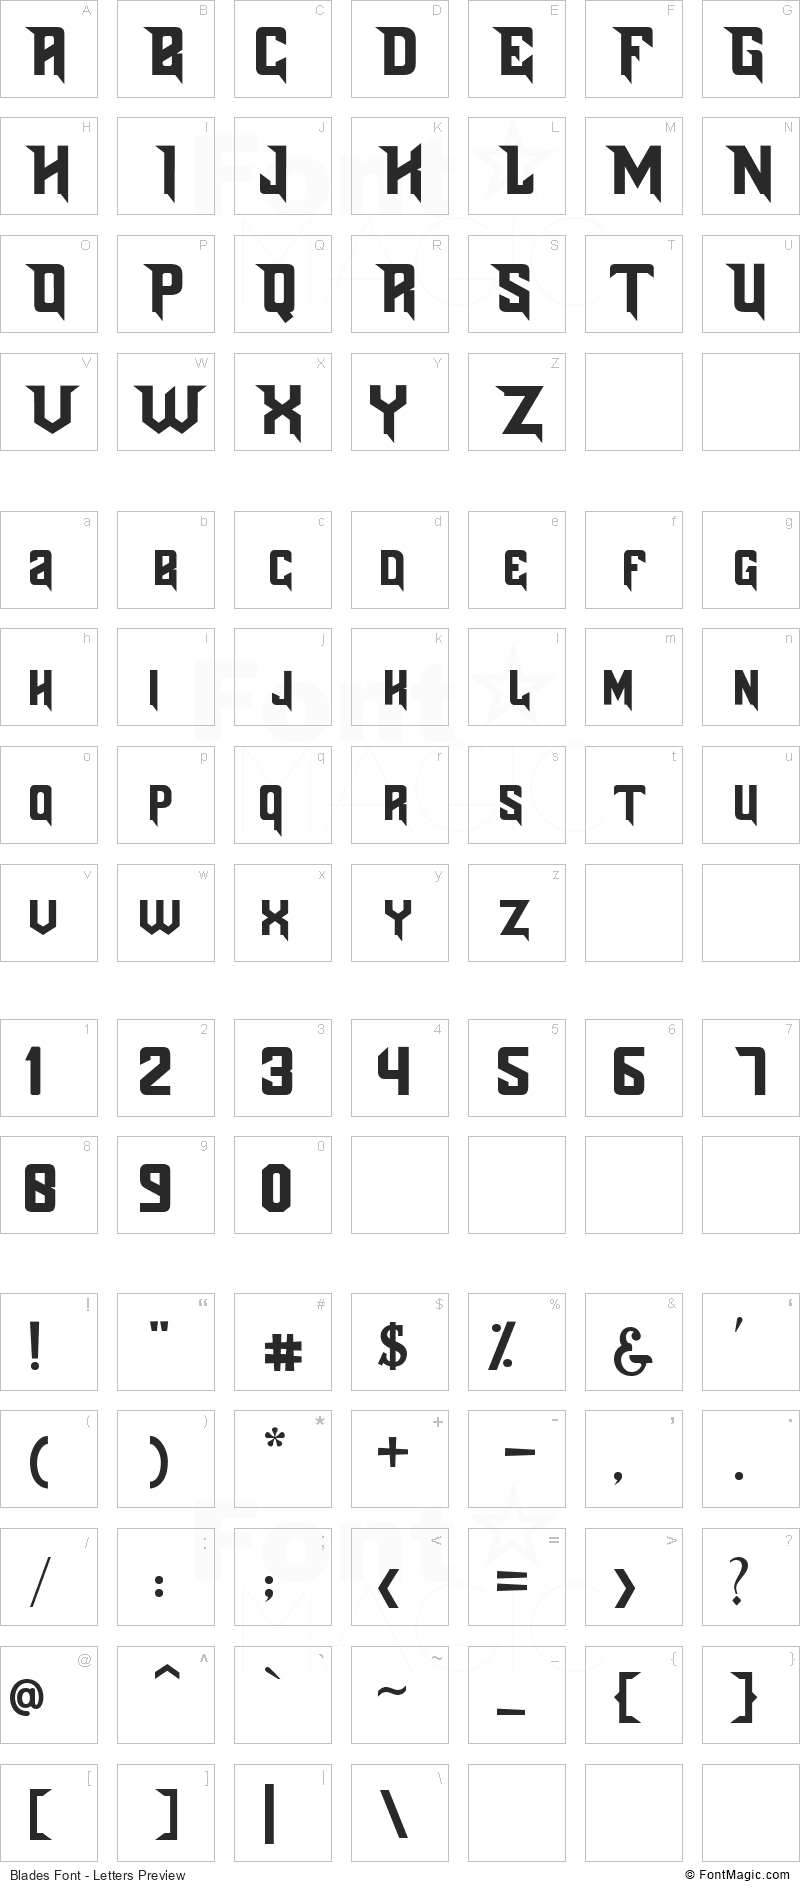 Blades Font - All Latters Preview Chart